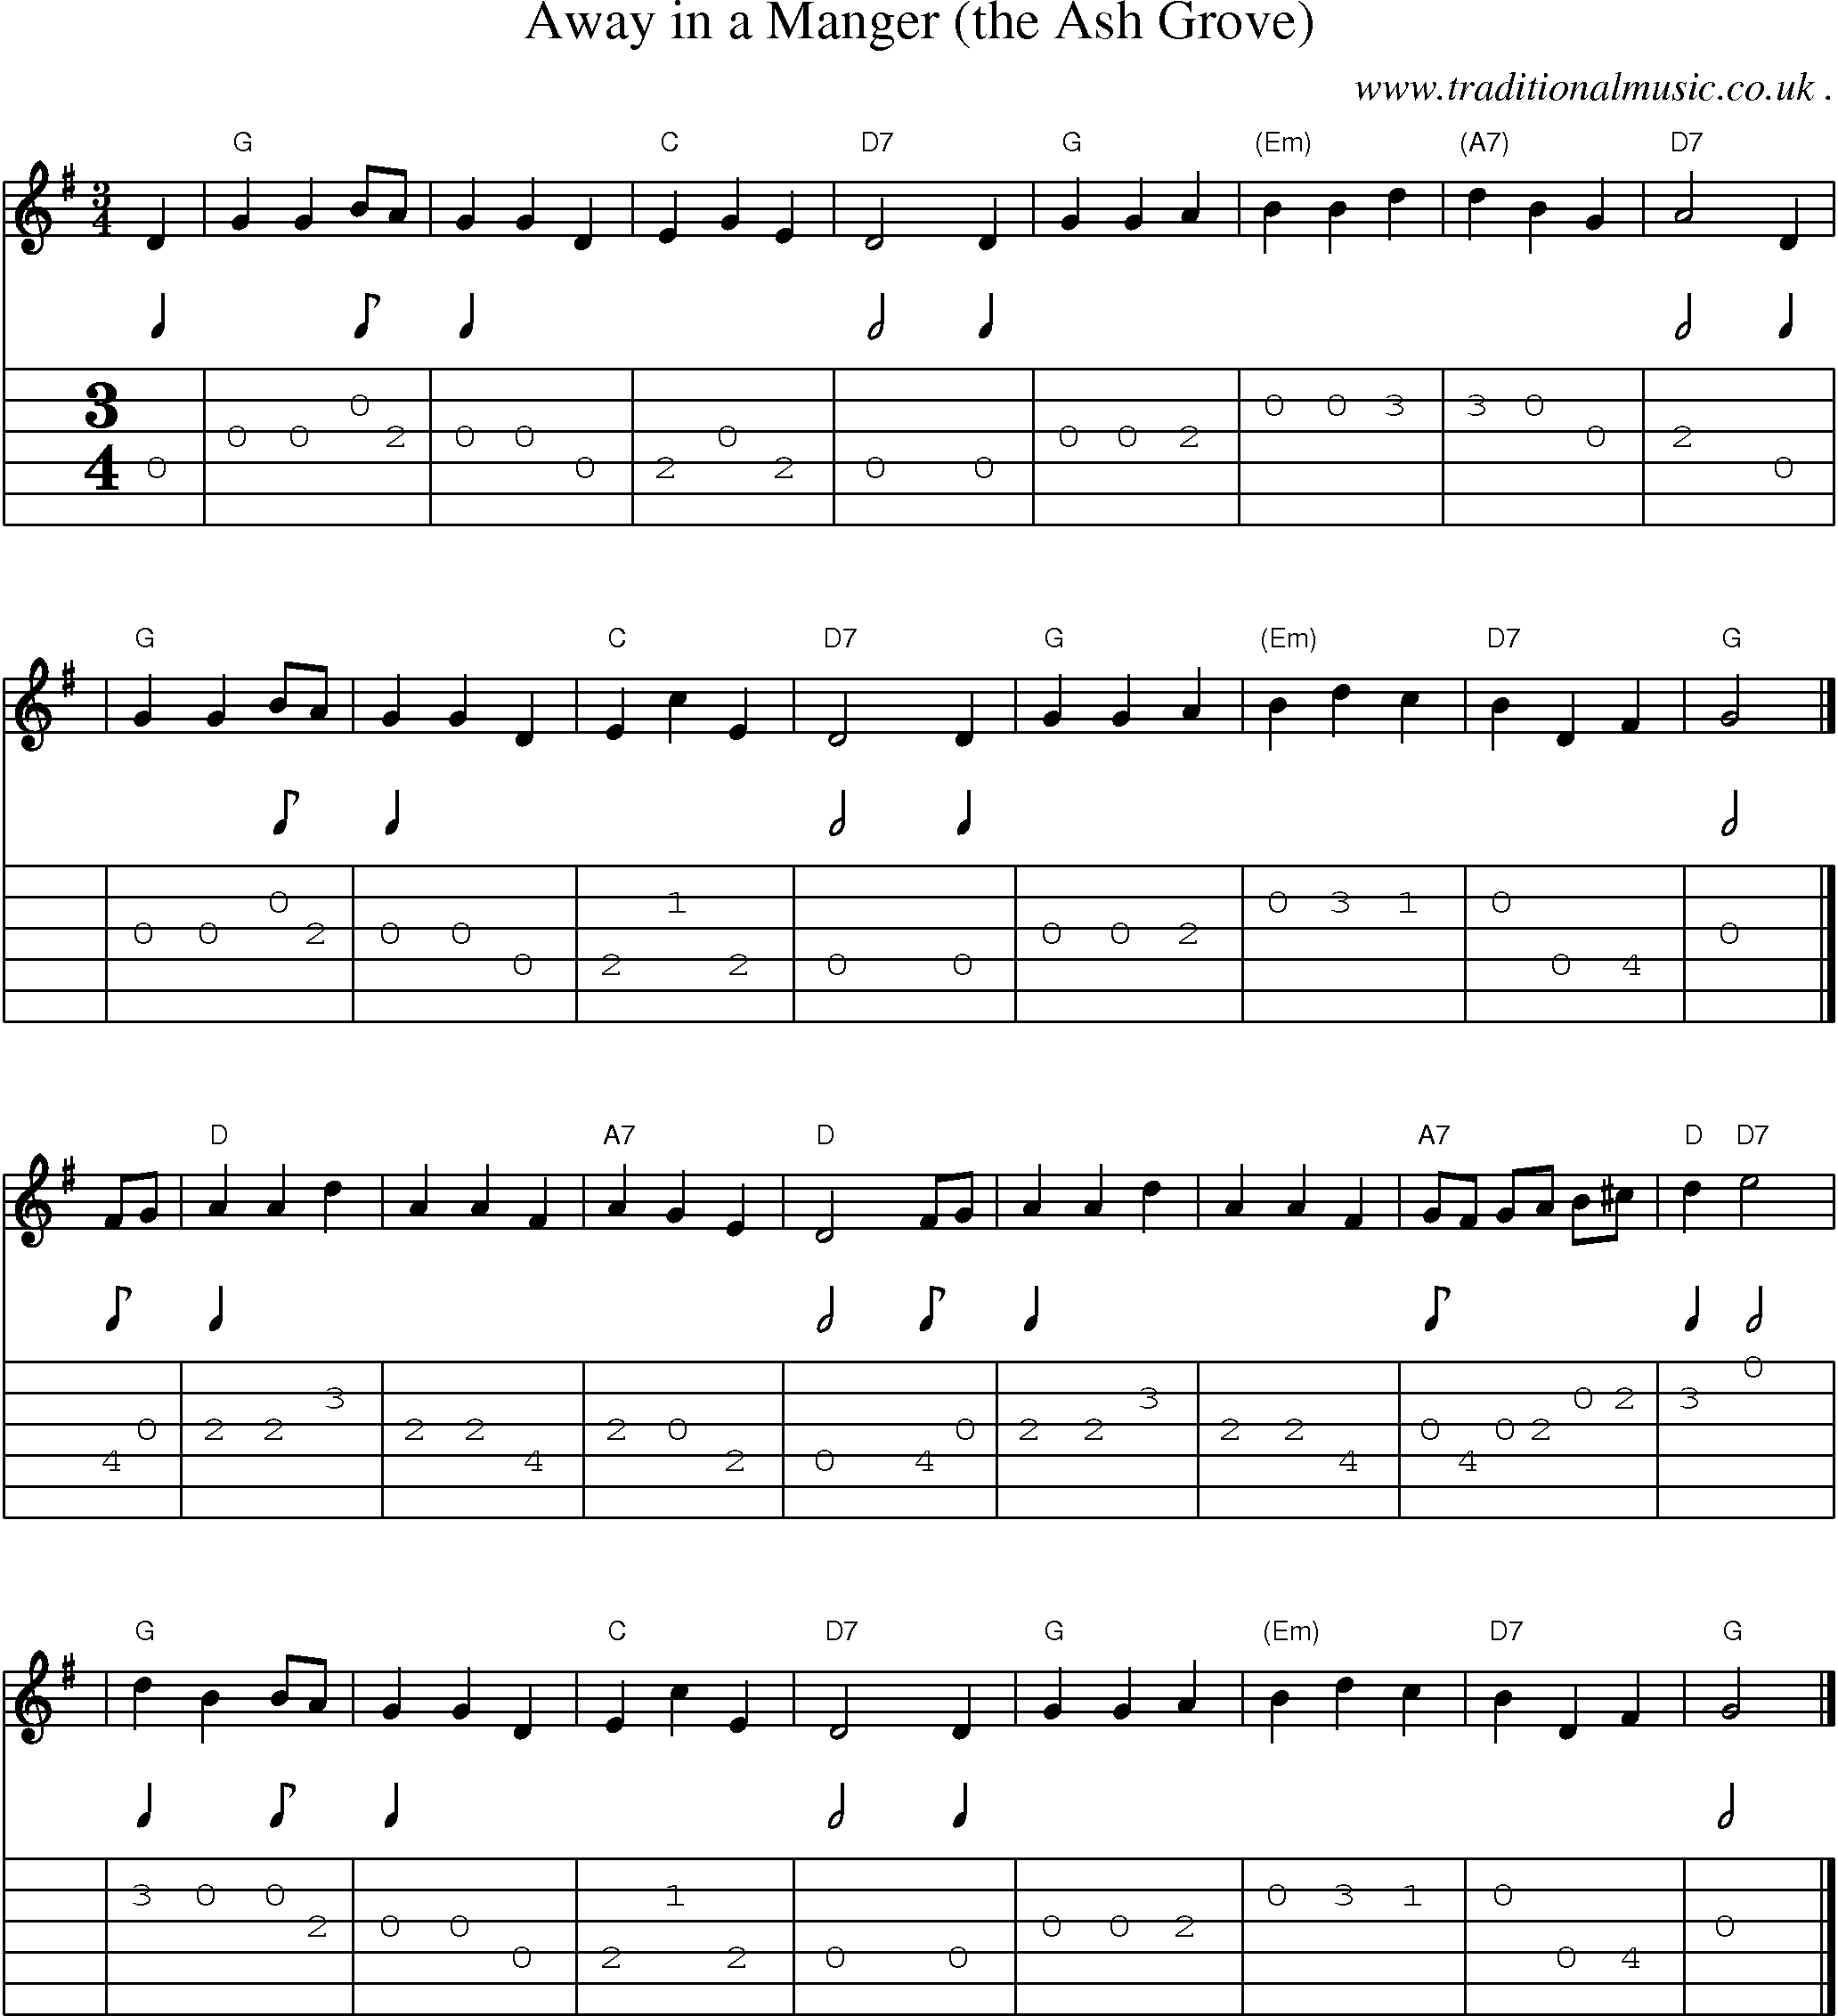 Sheet-music  score, Chords and Guitar Tabs for Away In A Manger The Ash Grove